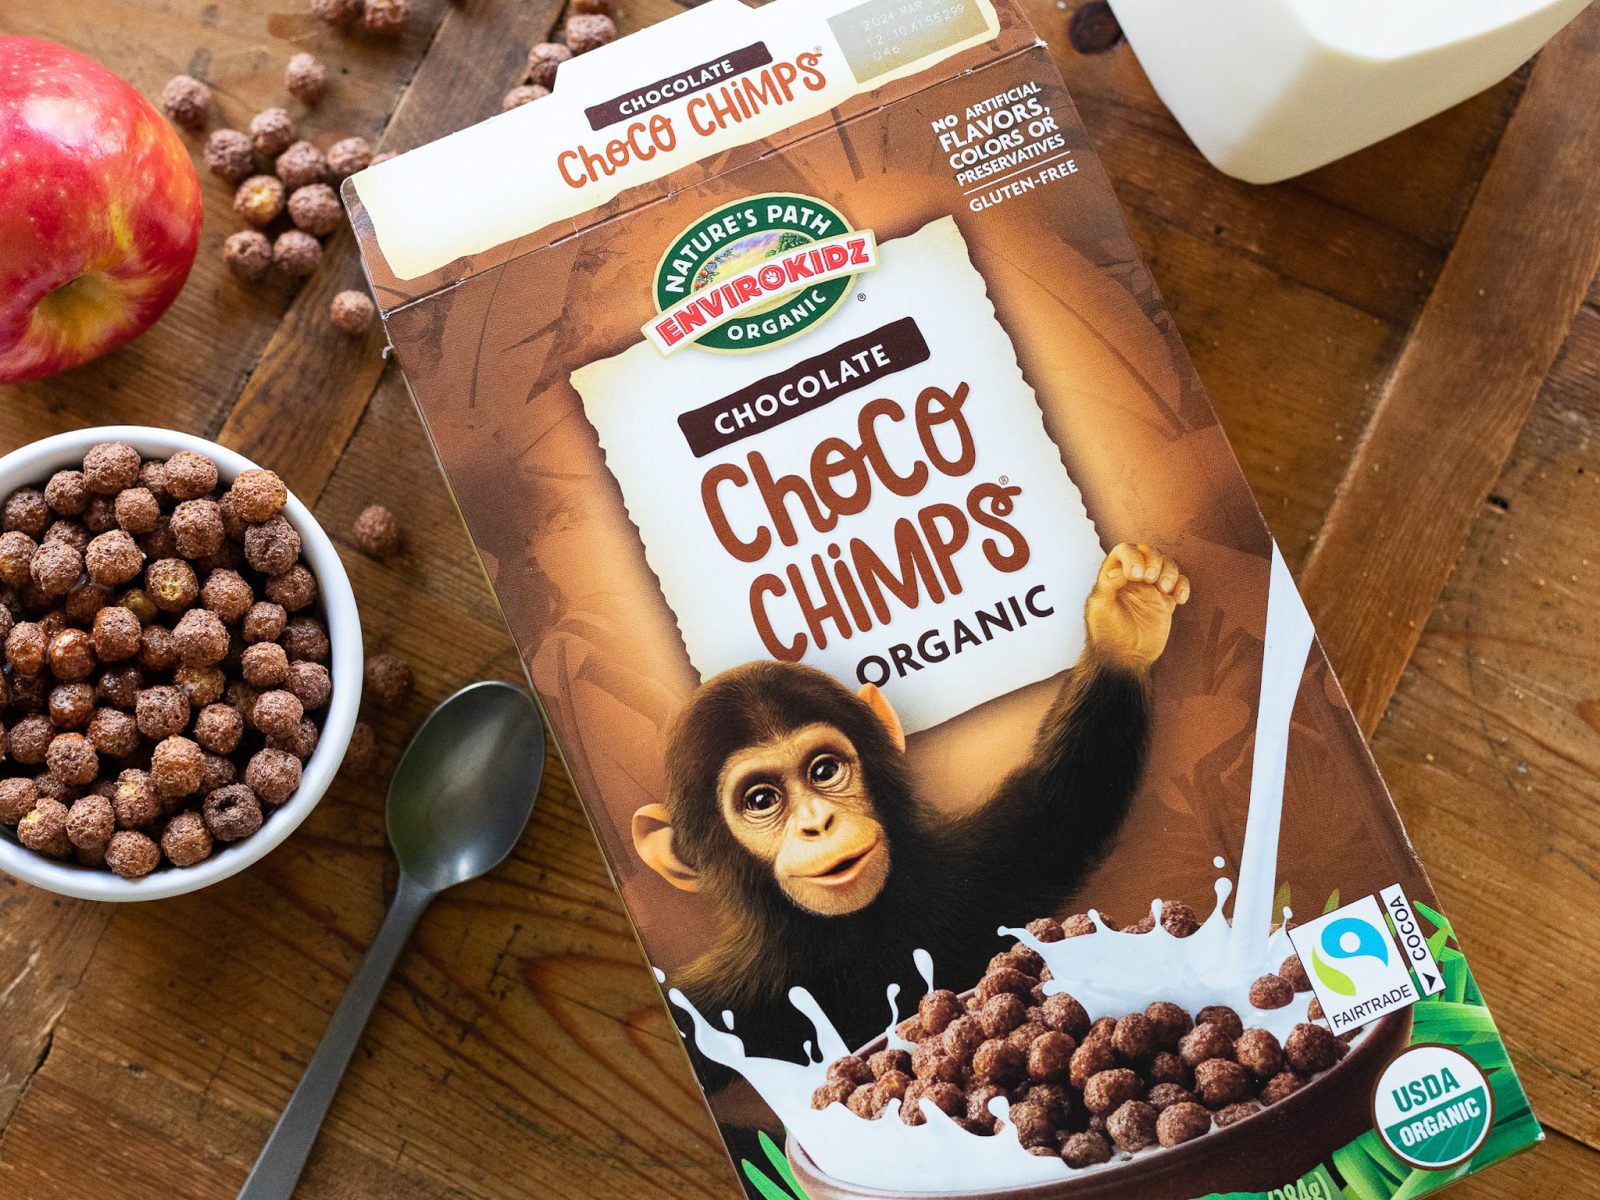 Nature’s Path Organic Choco Chimps Cereal Just $2.49 At Kroger